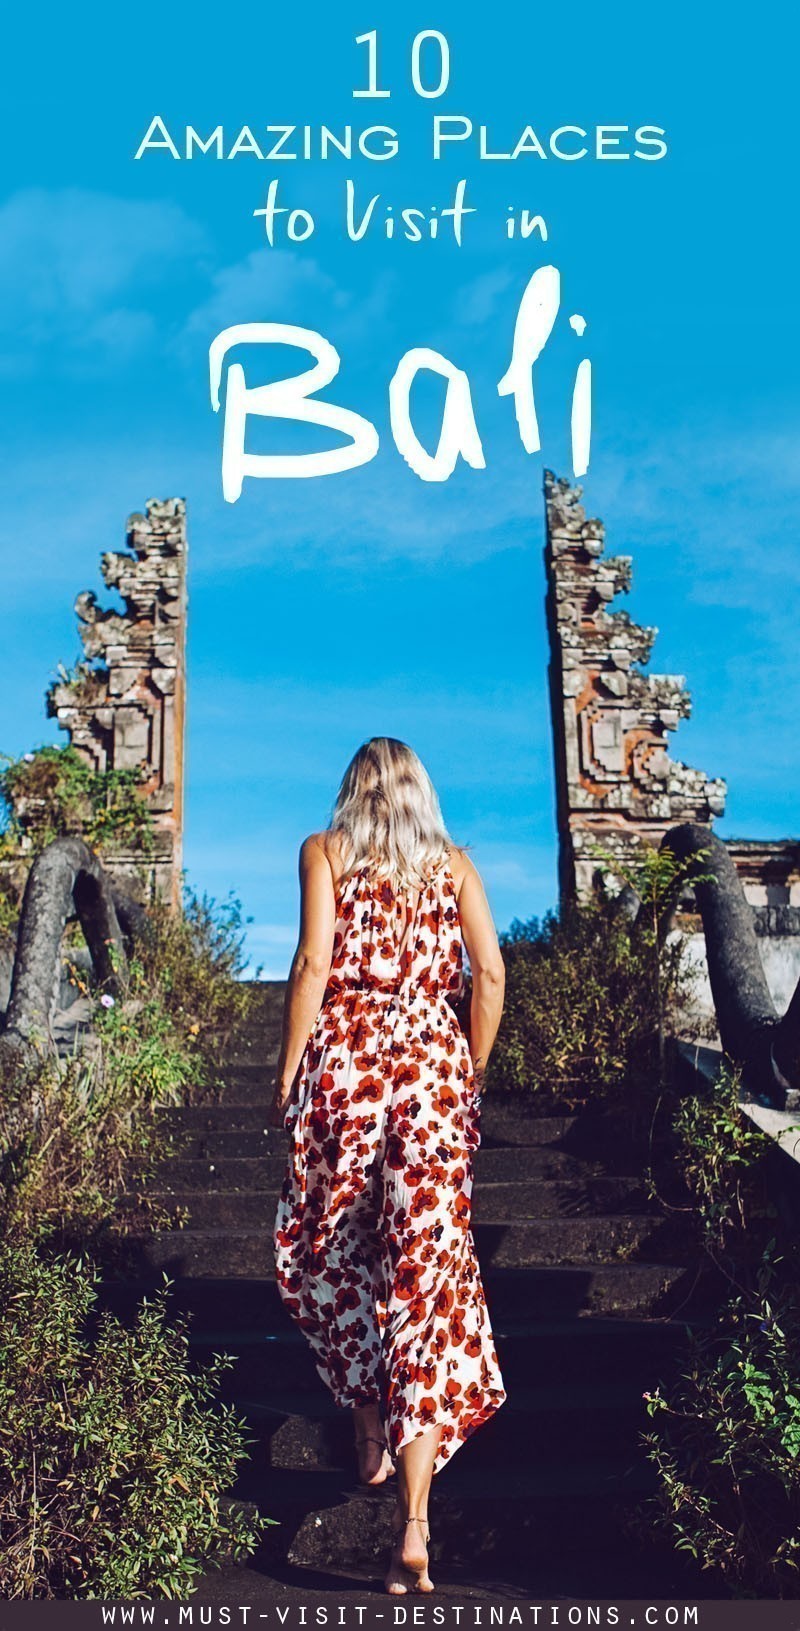 Discover the most popular tourist attractions to visit in Bali. Here is an overview of the TOP 10 most amazing places to visit in Bali.